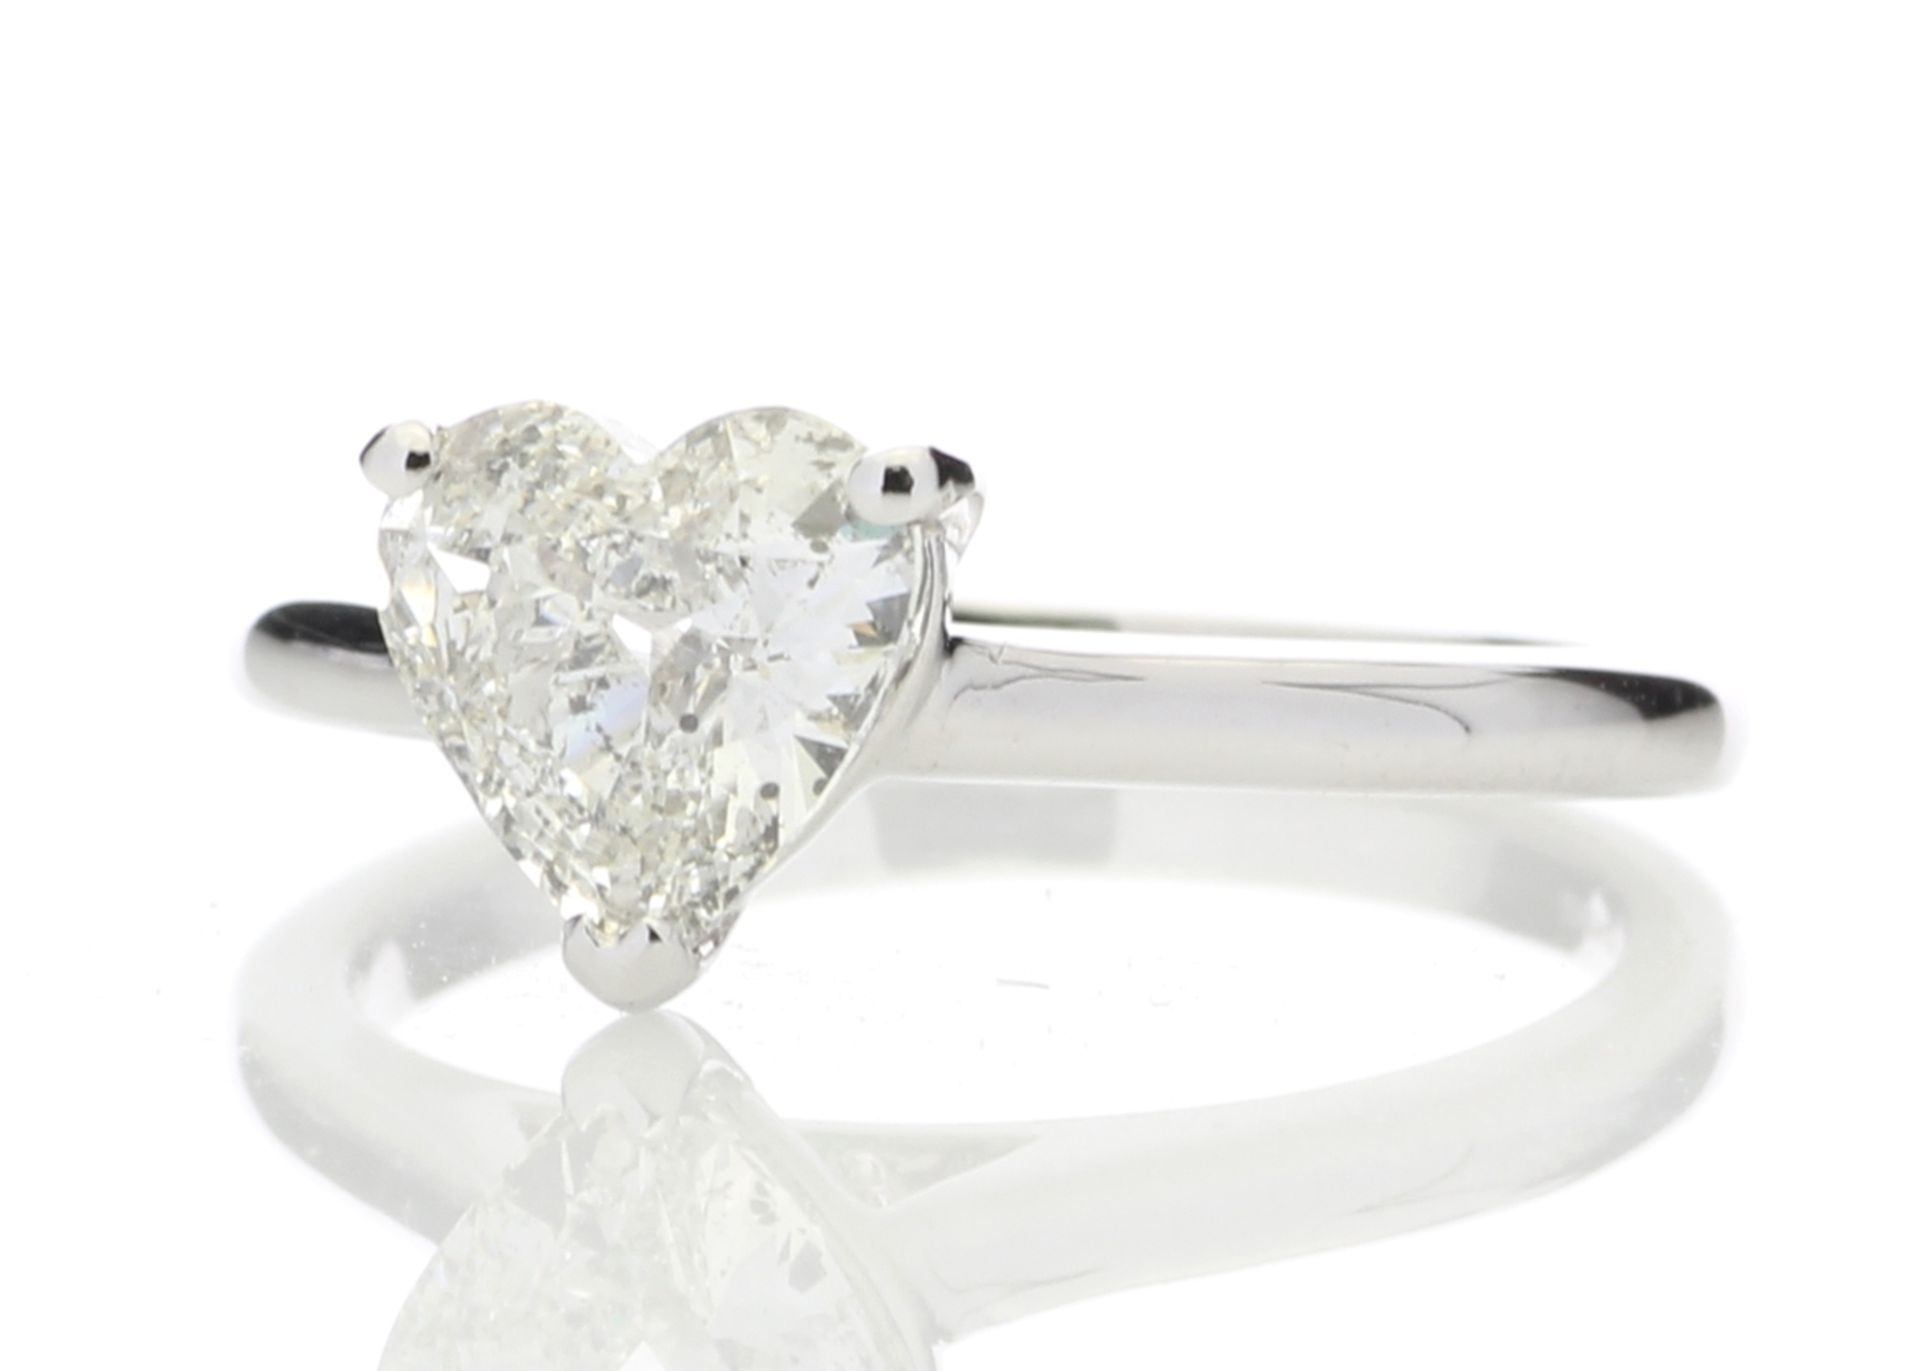 18ct White Gold Single Stone Heart Cut Diamond Ring 1.04 Carats - Valued by GIE £25,950.00 - A - Image 2 of 5